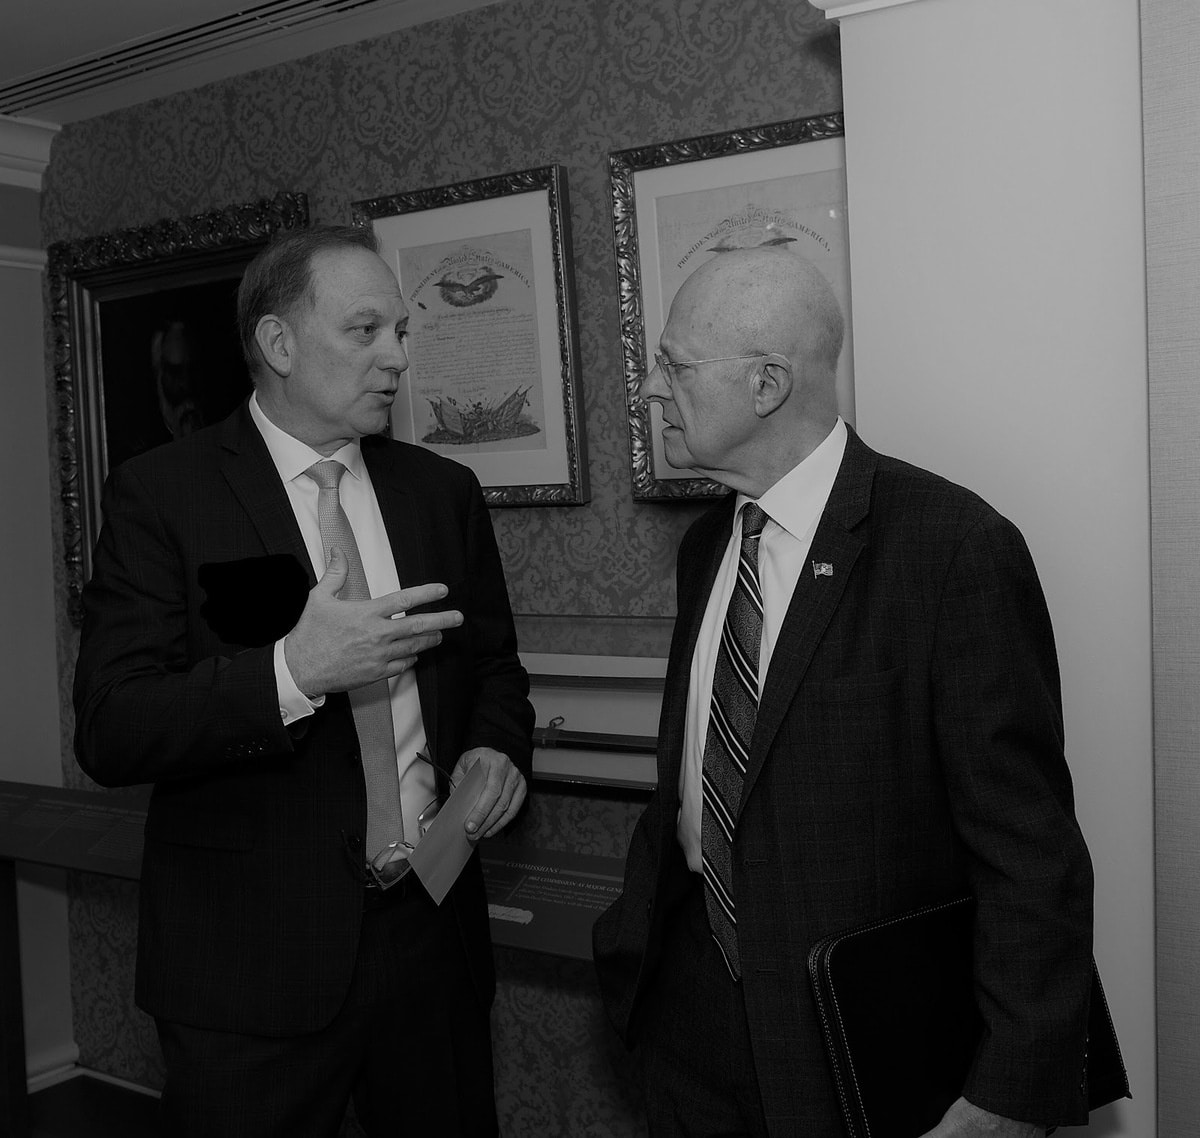 Director of National Intelligence, James Clapper, and Dr. Parker talk during a meeting in Washington DC.